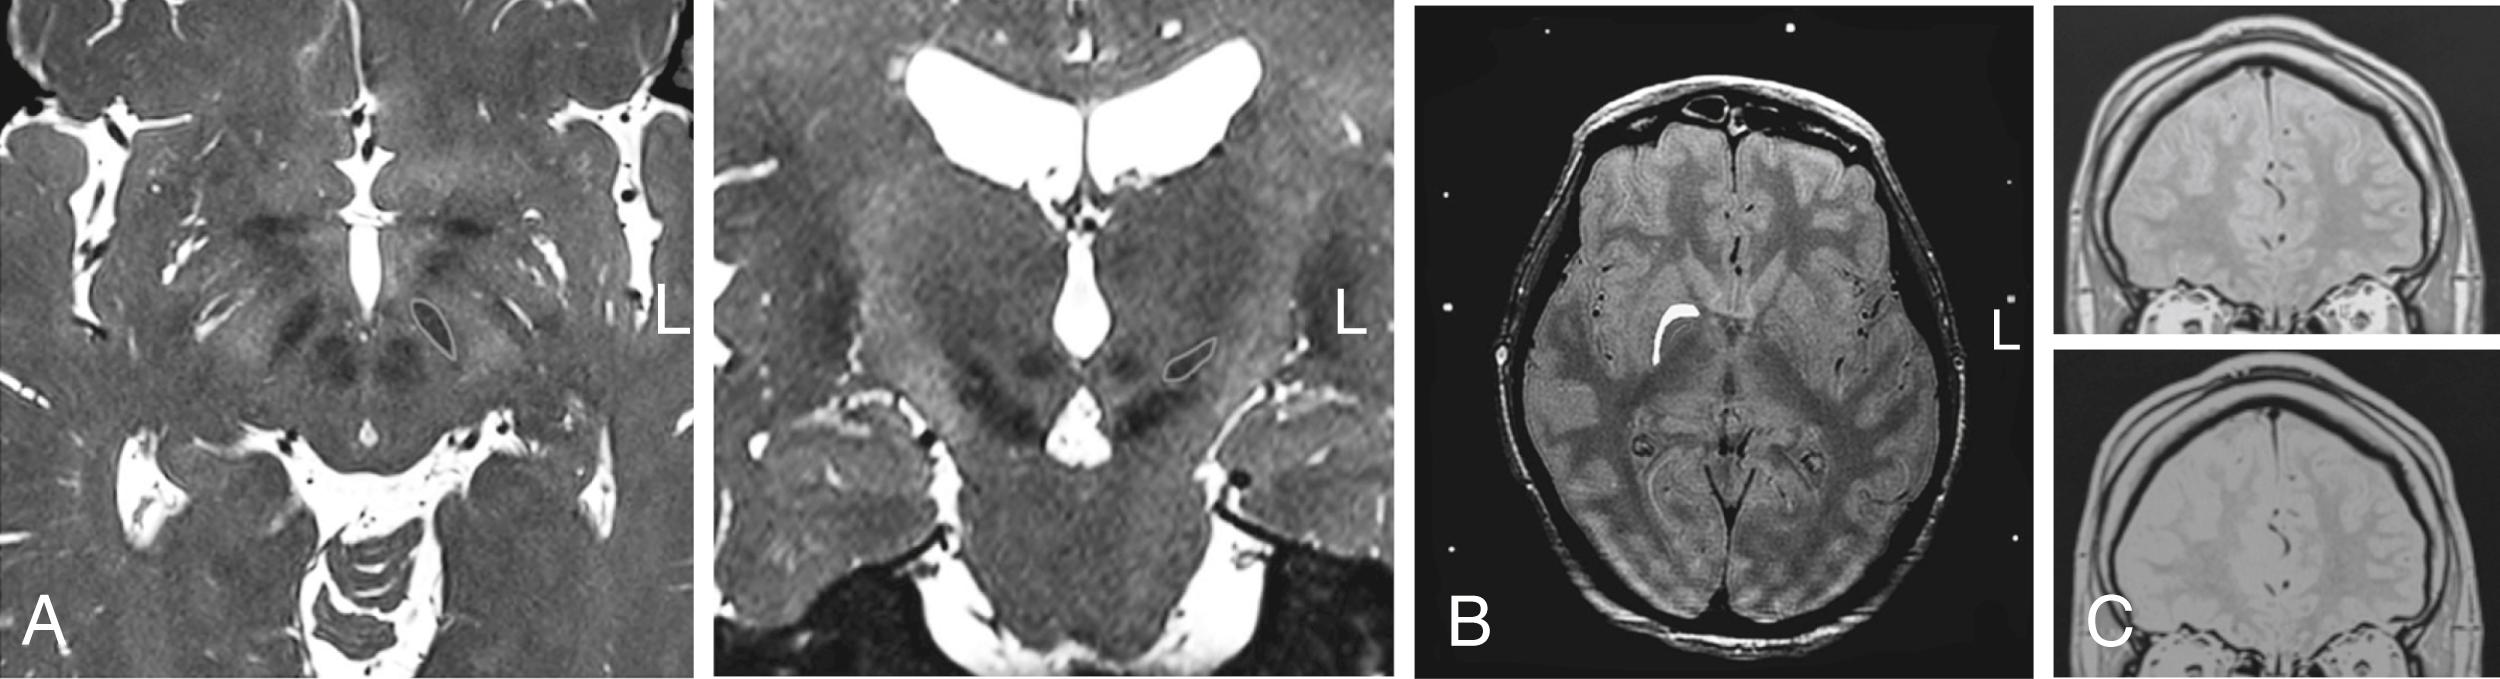 Figure 108.1, MRI-guided stereotactic functional neurosurgery.